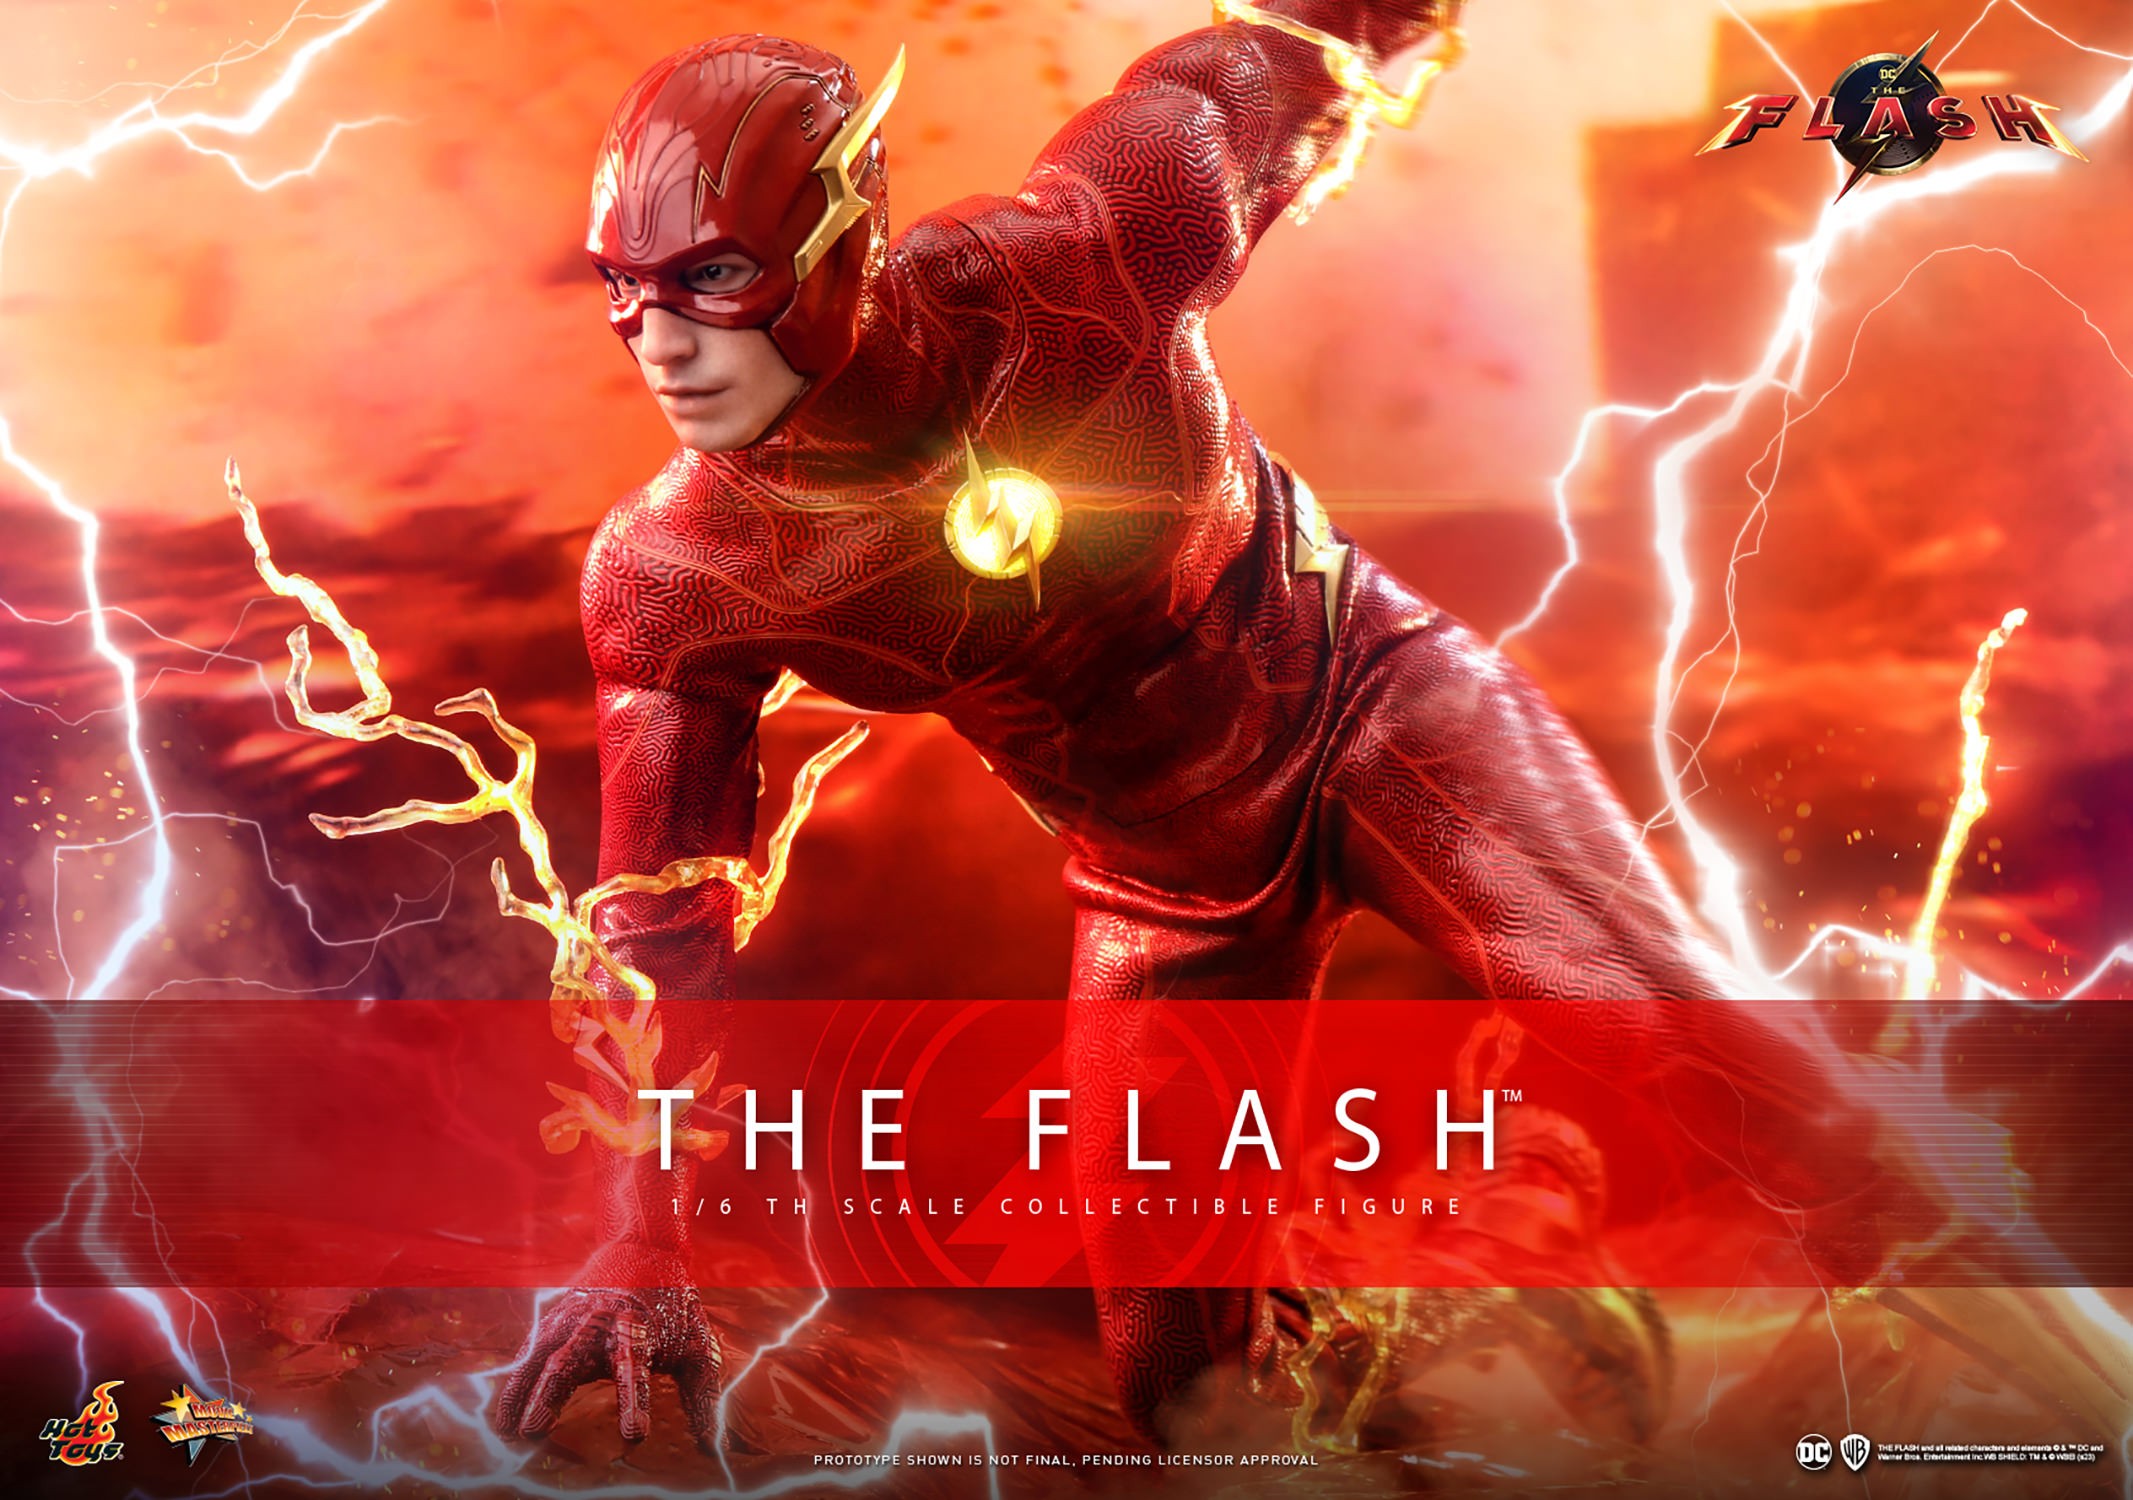 The Flash (Special Edition) (Prototype Shown) View 6